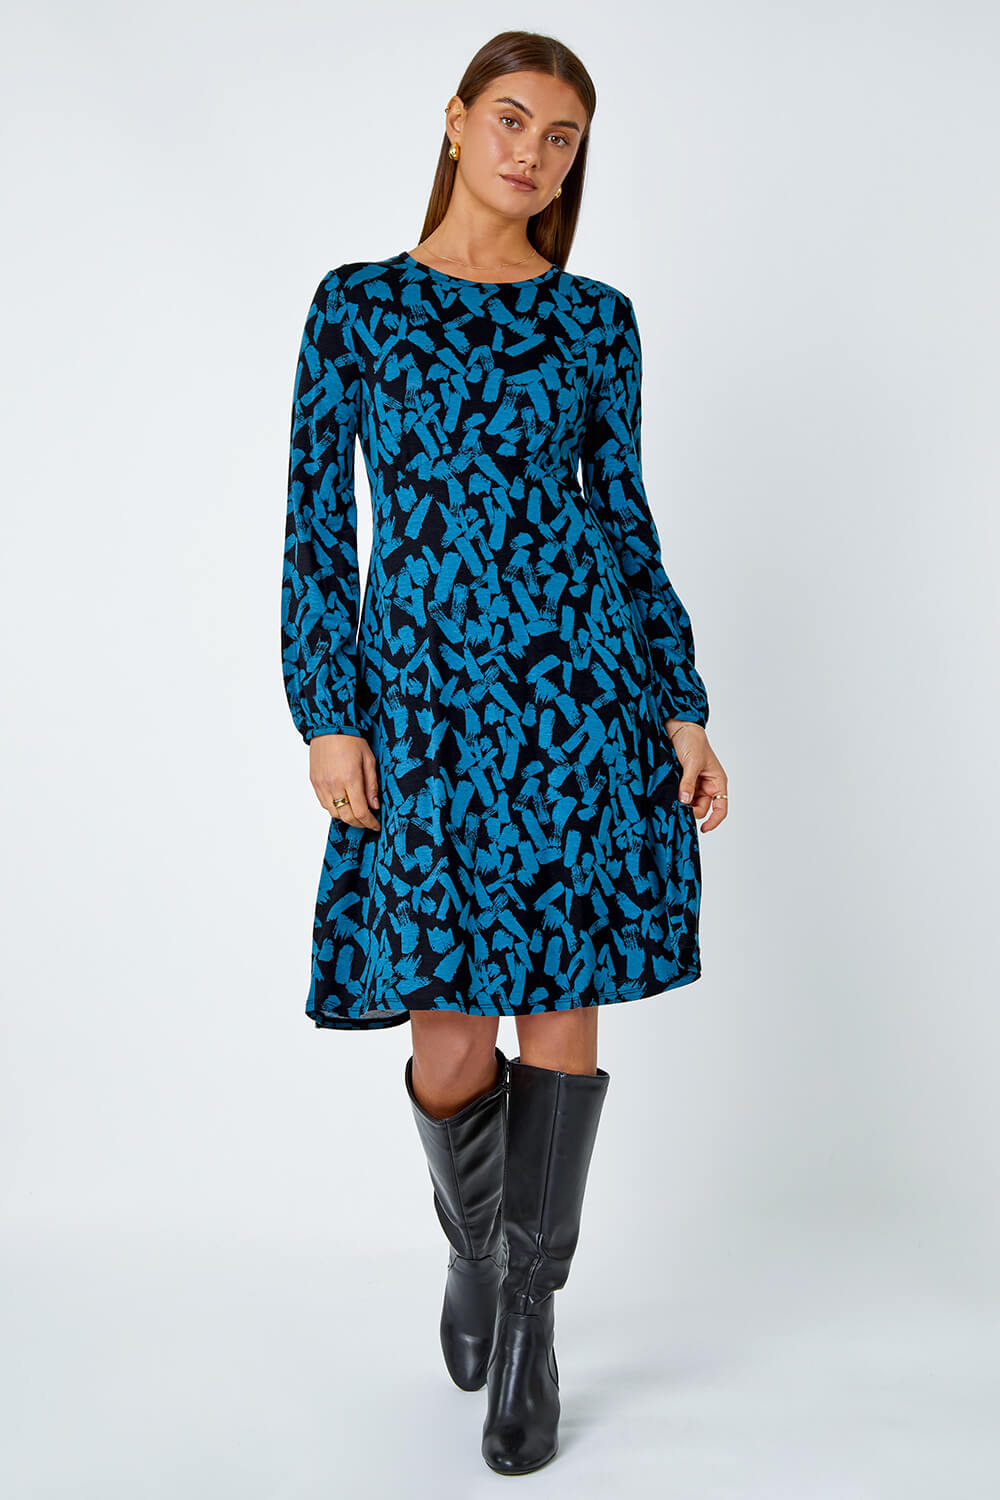 Blue Abstract Print Swing Stretch Dress, Image 2 of 5